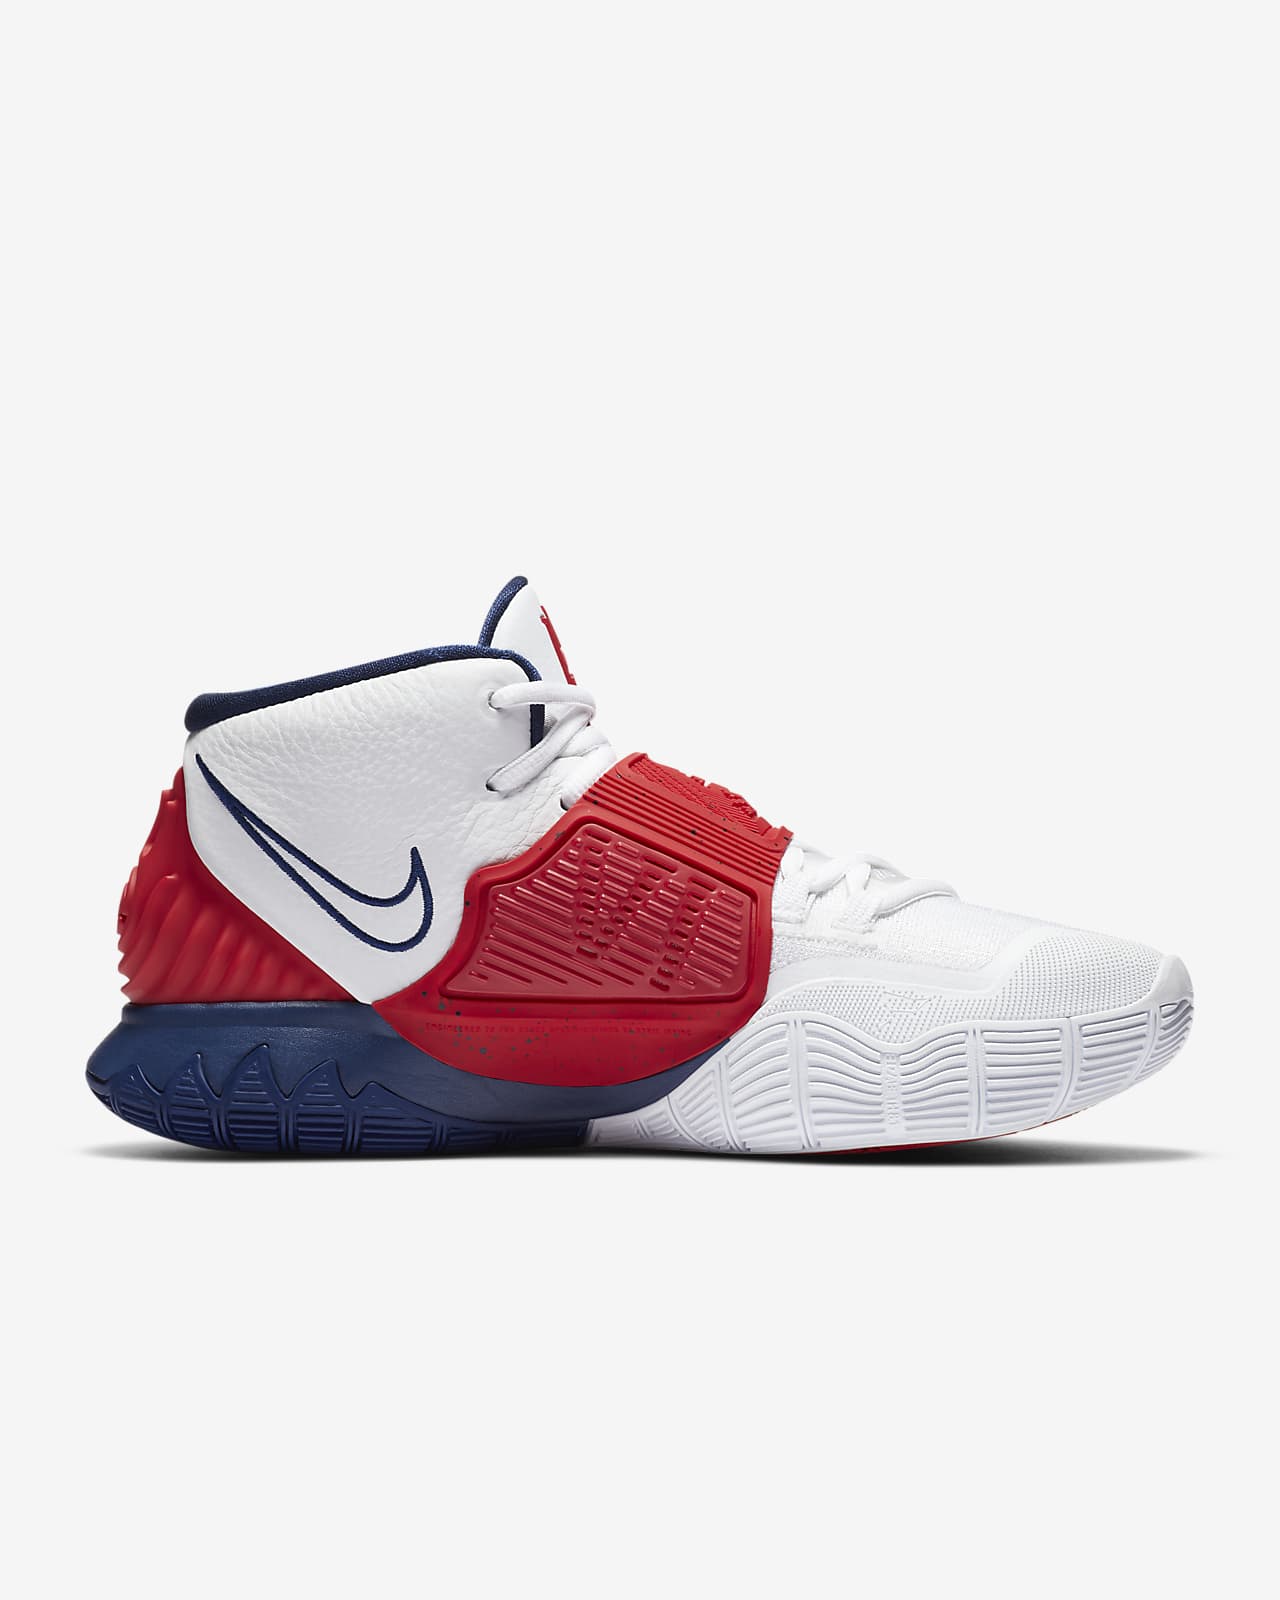 kyrie irving 6 red